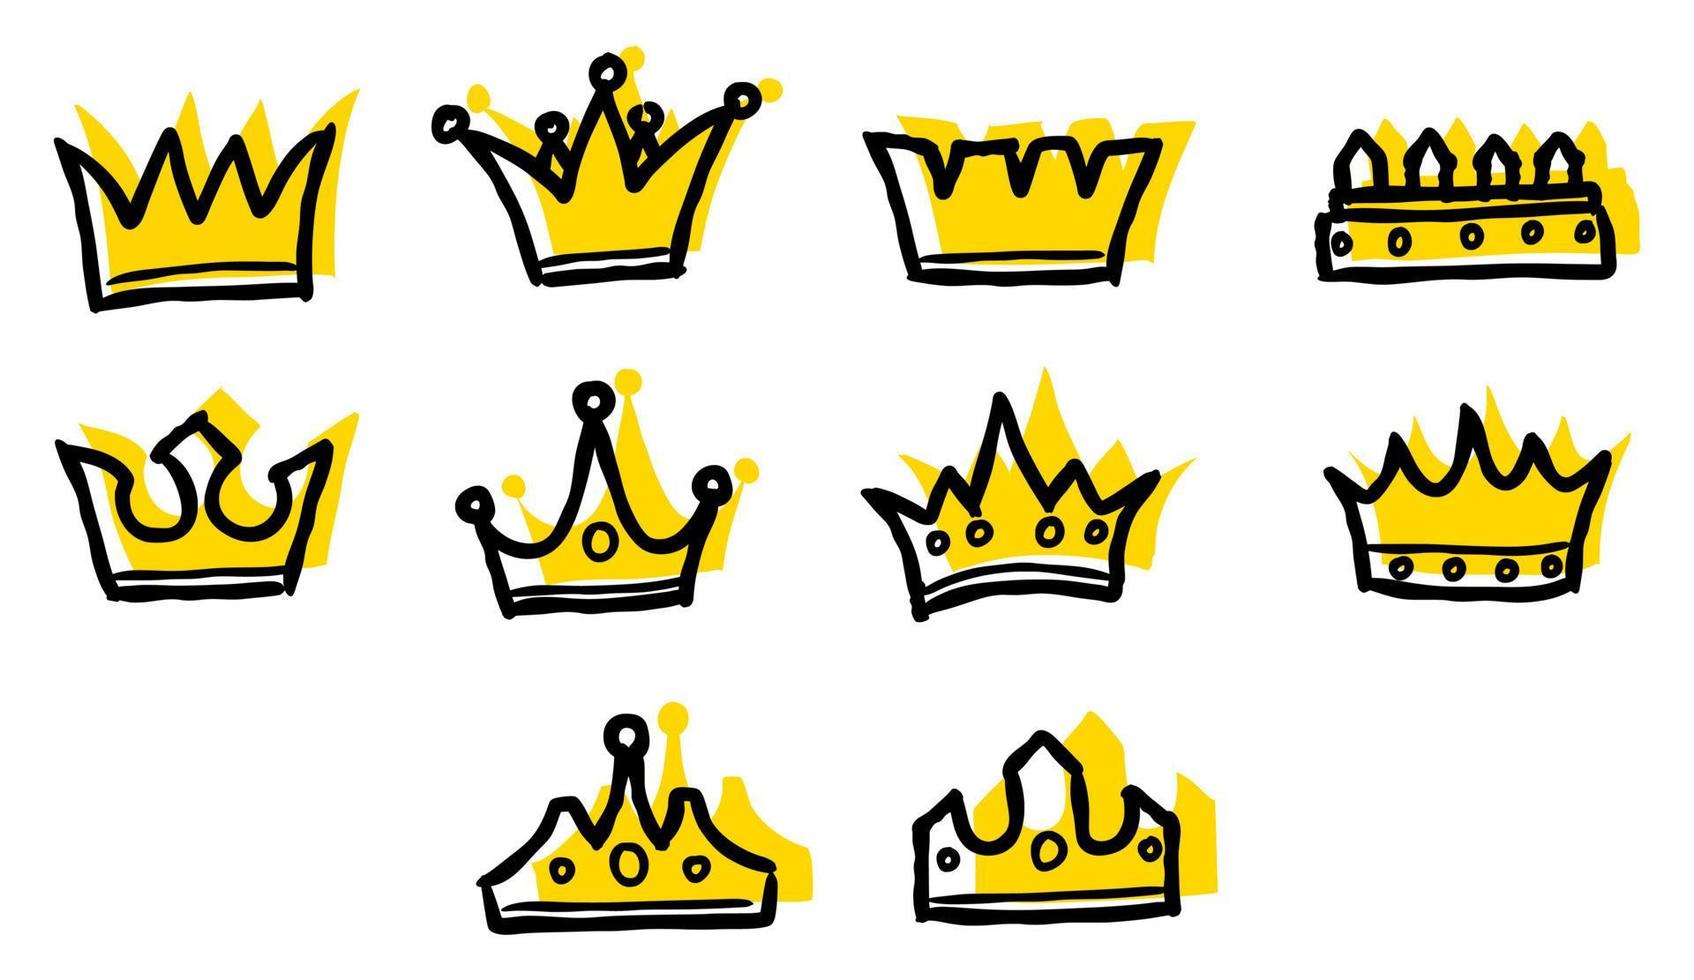 Crown collection with hand drawn style vector